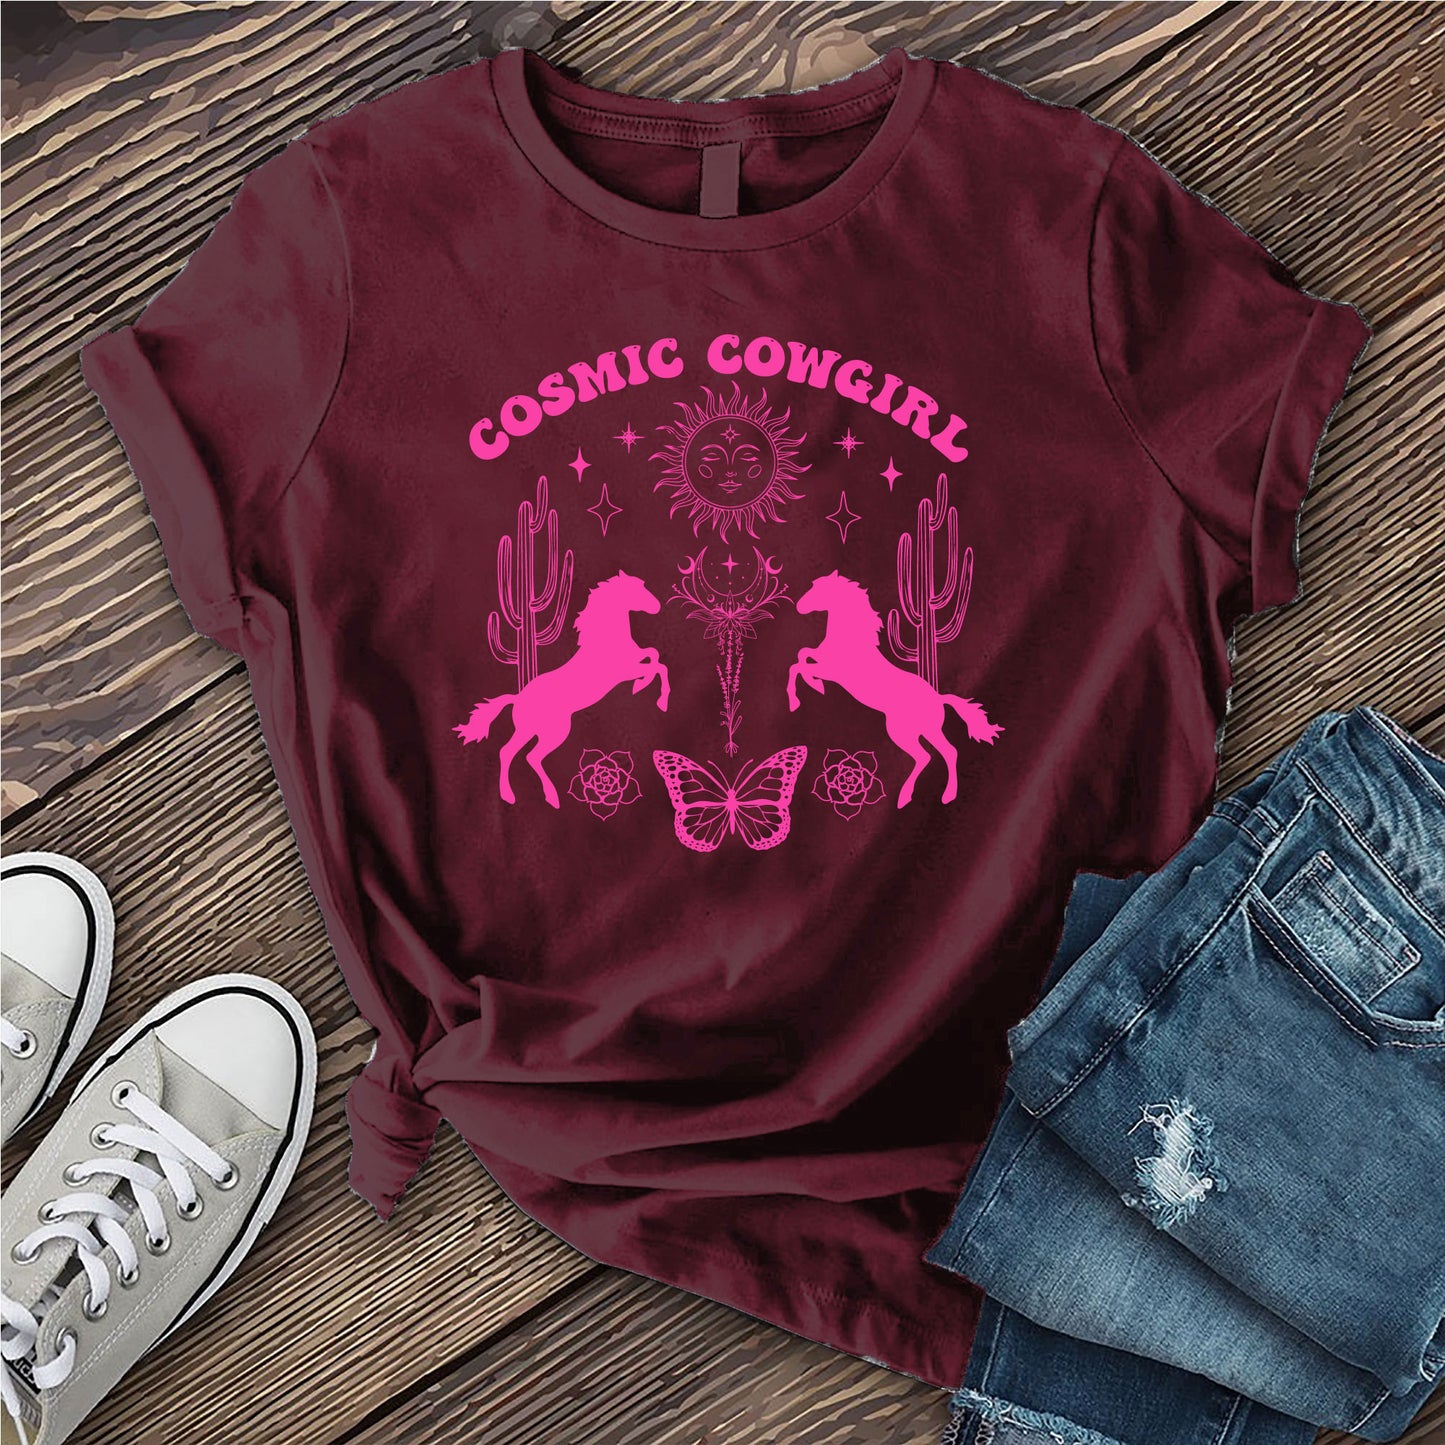 Artifacts of Cosmic Cowgirl T-Shirt